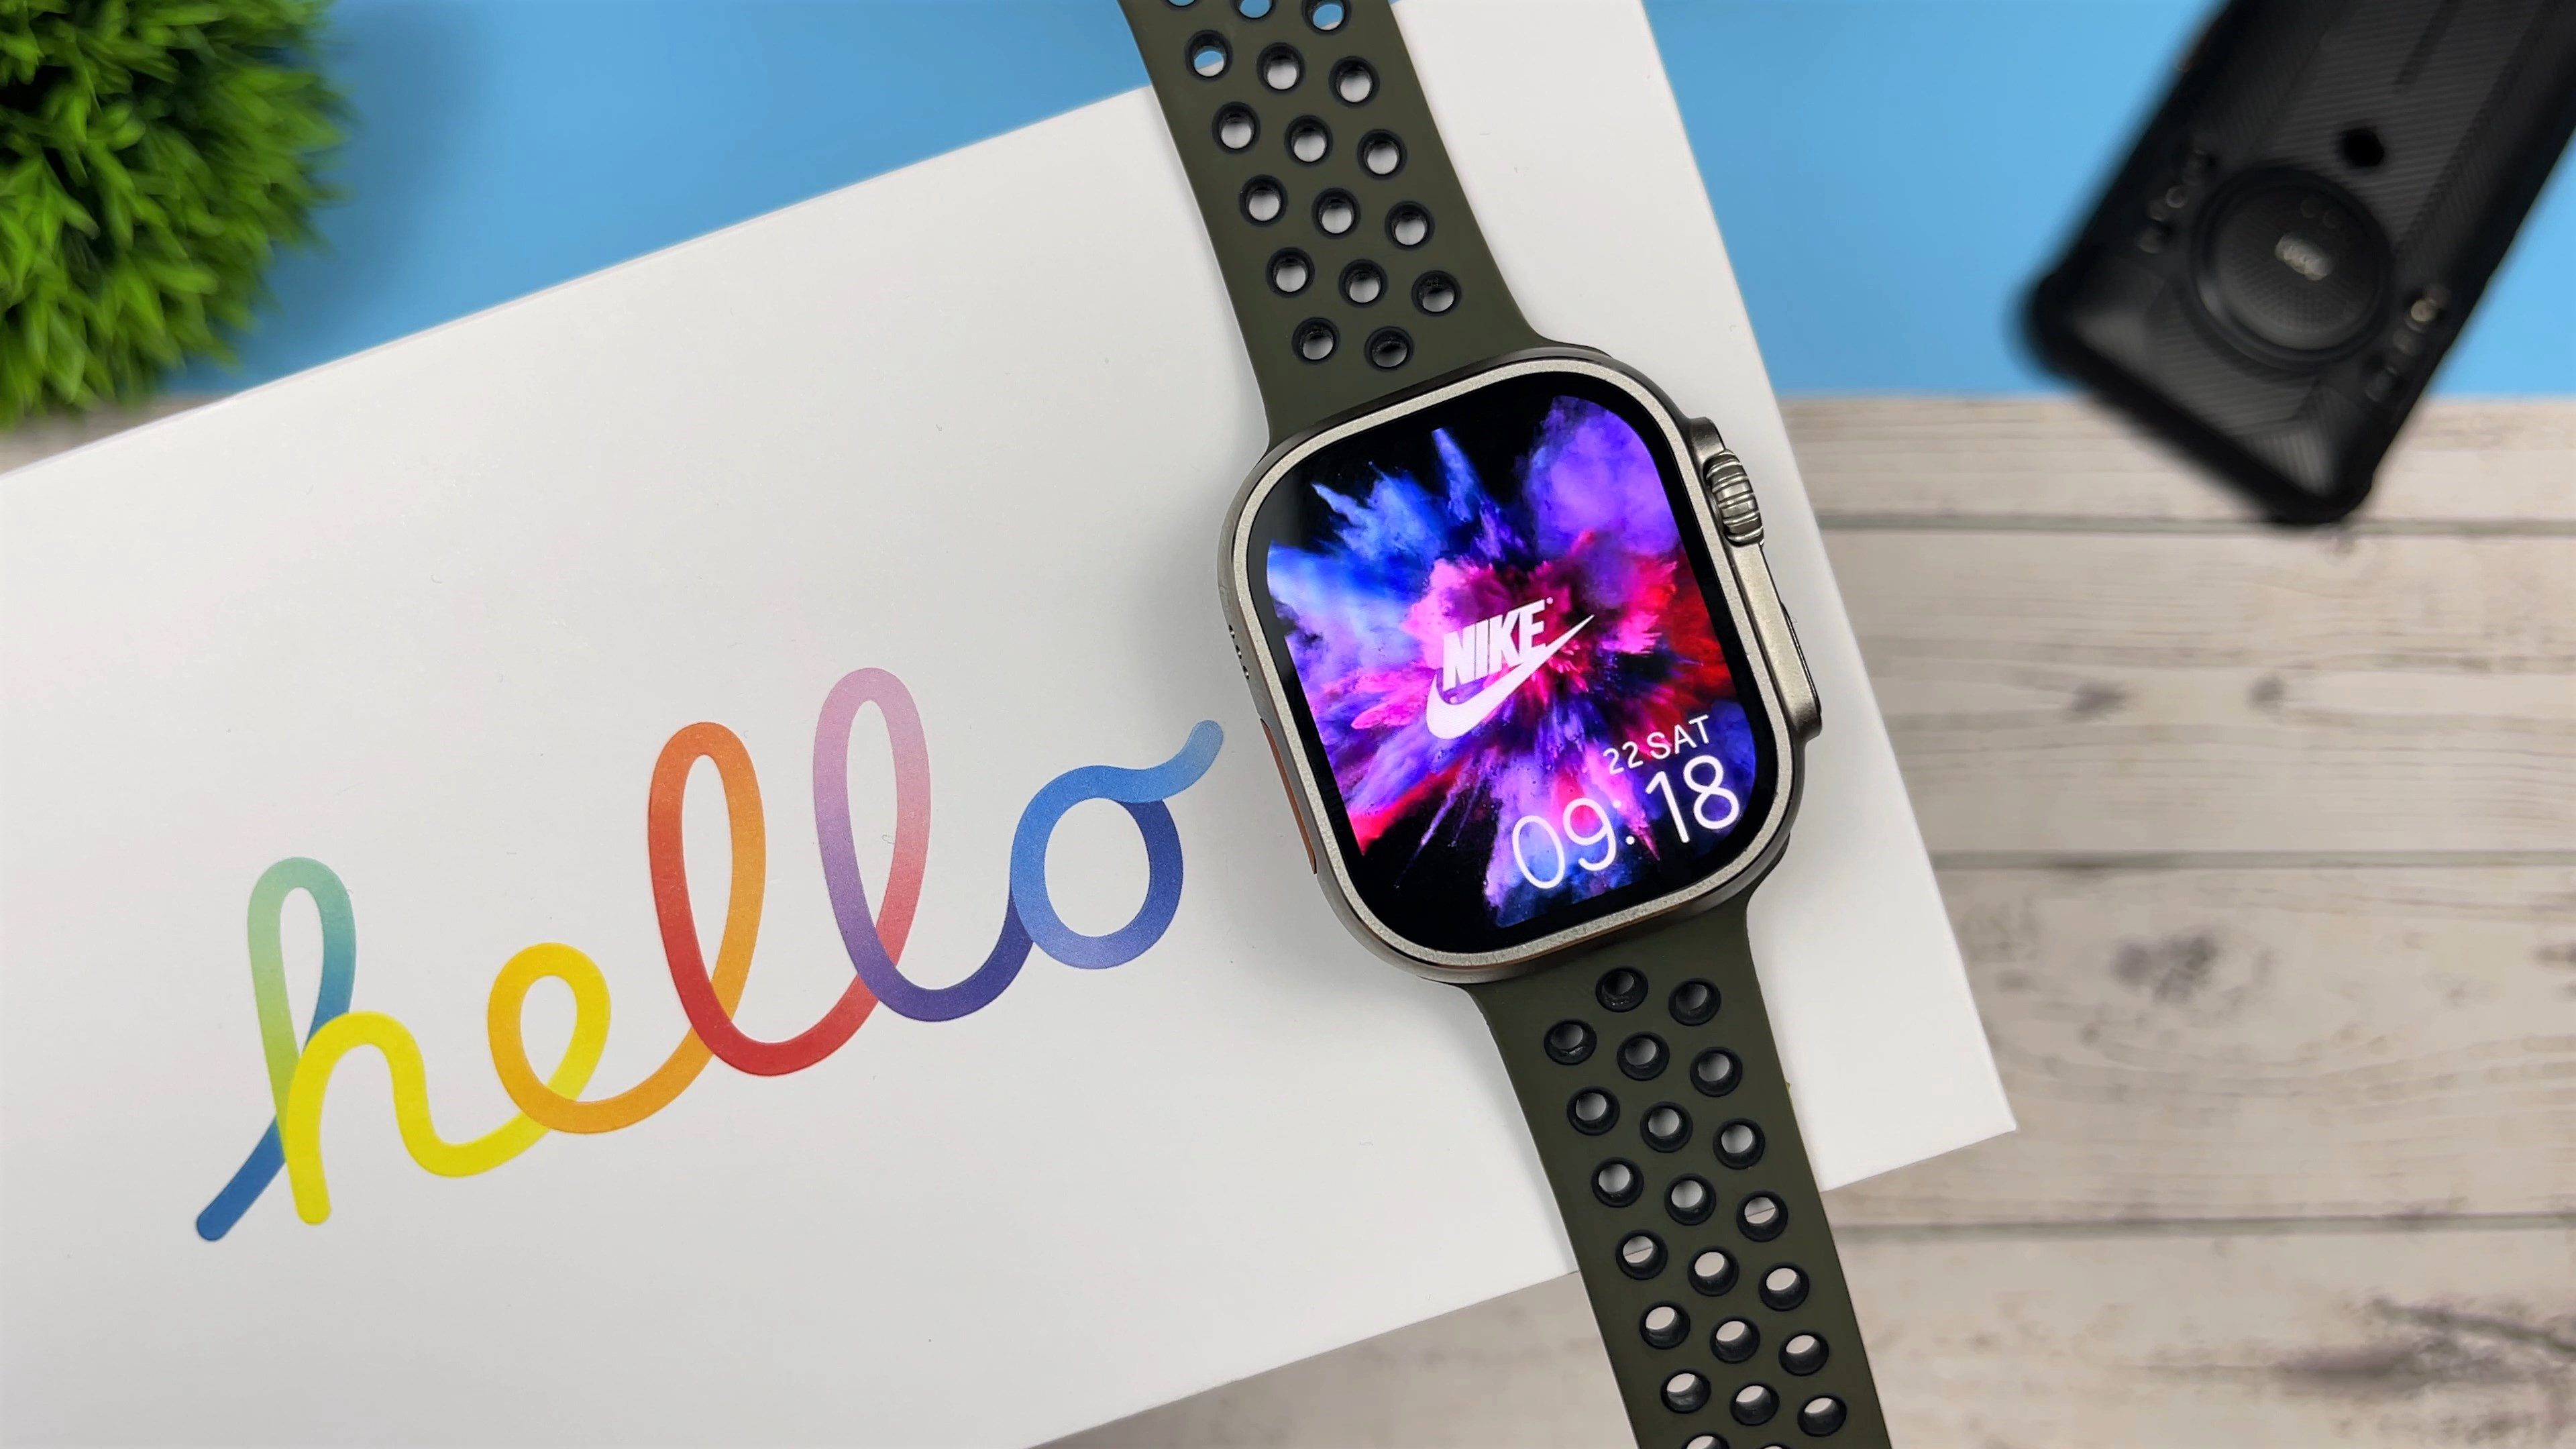 Hello Watch 3 Review - A Full Analysis of Design, Features, Updates, and Performance